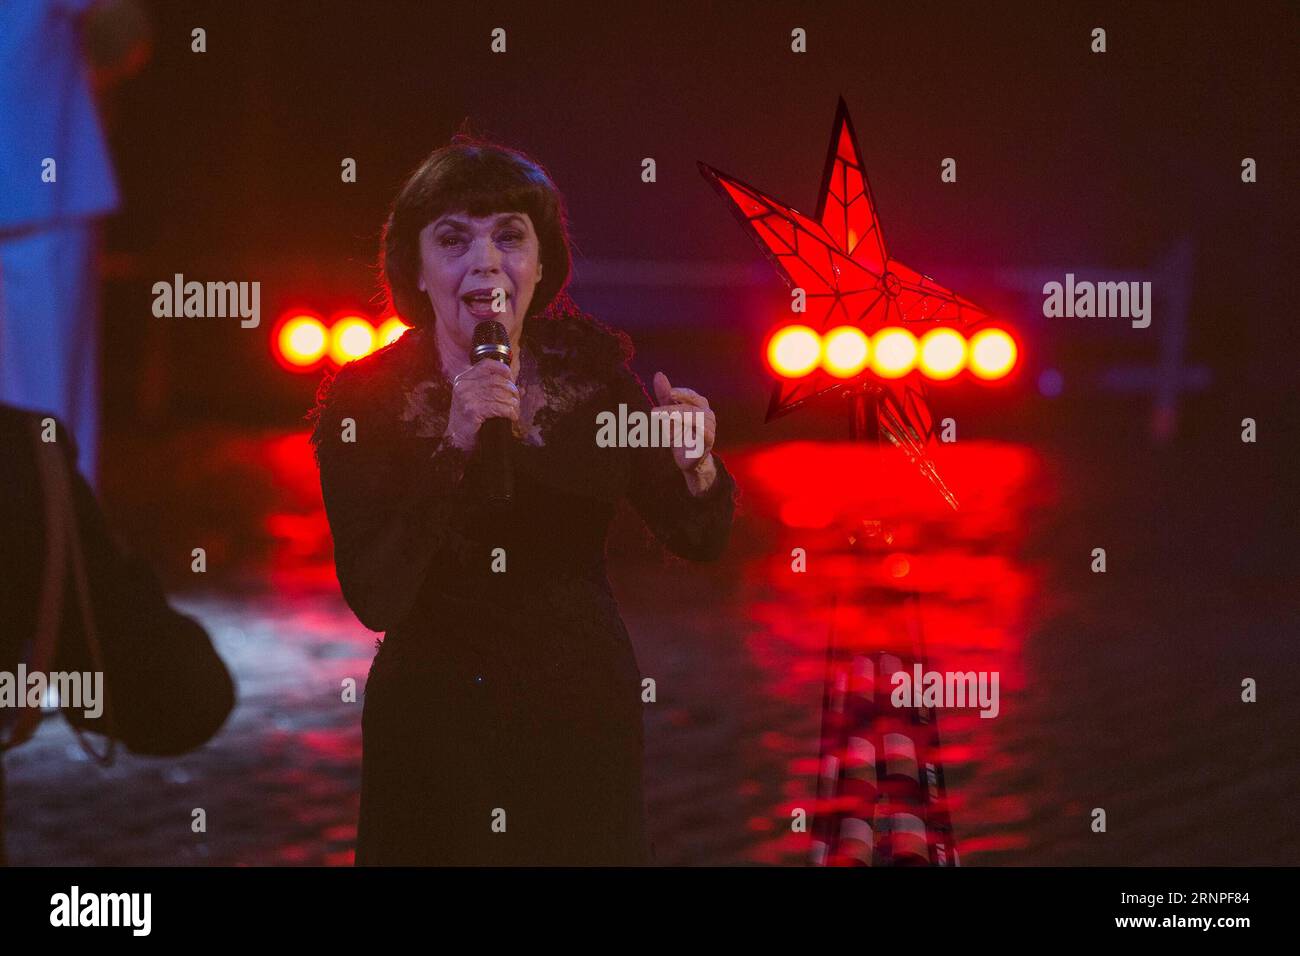 (170827) -- MOSCOW, Aug. 27, 2017 -- A multi-exposure photo shows French singer Mireille Mathieu performing during the Spasskaya Tower International Military Music Festival in Moscow, Russia, on Aug. 26, 2017. The Spasskaya Tower International Military Music Festival opened on Red Square in Moscow on Saturday. ) (dtf) RUSSIA-MOSCOW-FESTIVAL-SPASSKAYA TOWER BaixXueqi PUBLICATIONxNOTxINxCHN   Moscow Aug 27 2017 a Multi exposure Photo Shows French Singer Mireille Mathieu Performing during The Fun Kaya Tower International Military Music Festival in Moscow Russia ON Aug 26 2017 The Fun Kaya Tower I Stock Photo